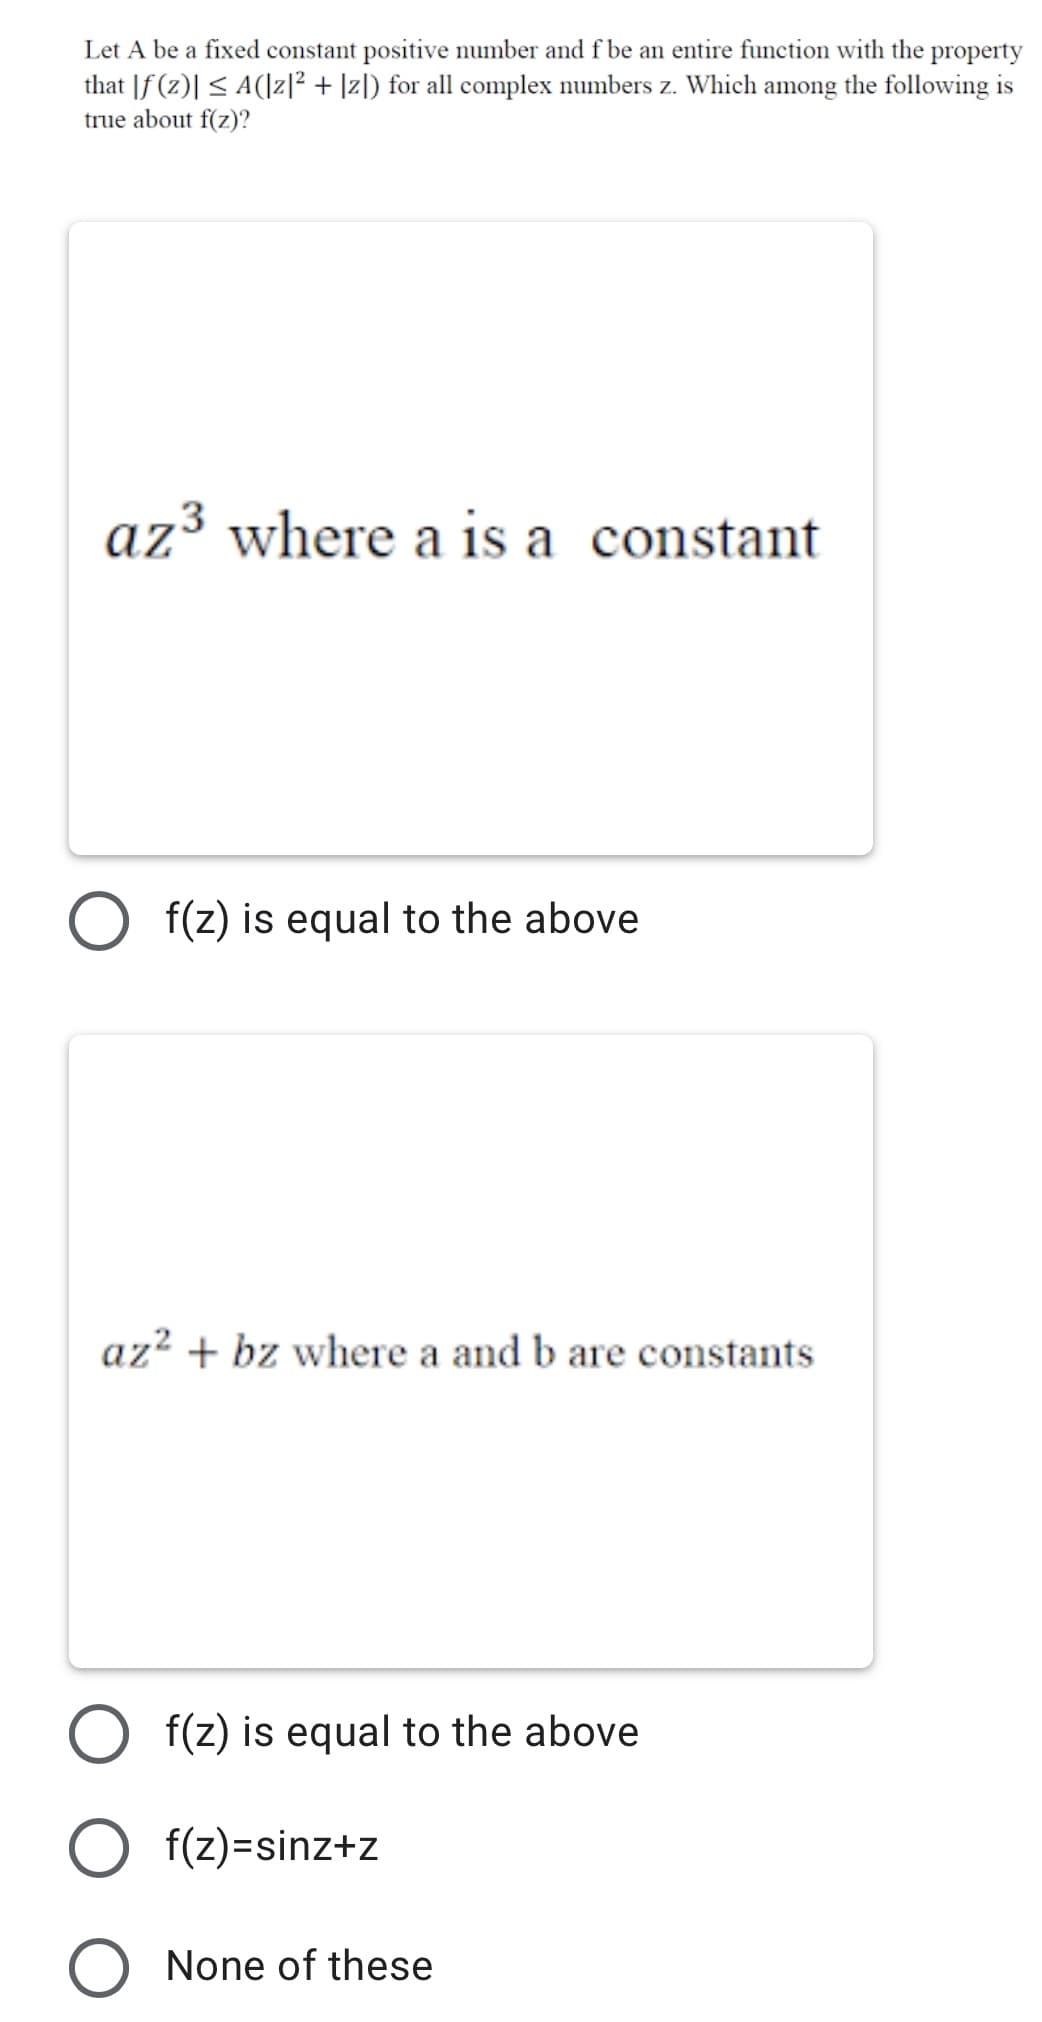 Let A be a fixed constant positive number and f be an entire function with the property
that |f (z)| < A(|z]² + ]zl) for all complex numbers z. Which among the following is
true about f(z)?
az³ where a is a constant
f(z) is equal to the above
az² + bz where a and b are constants
O f(z) is equal to the above
O f(z)=sinz+z
None of these
